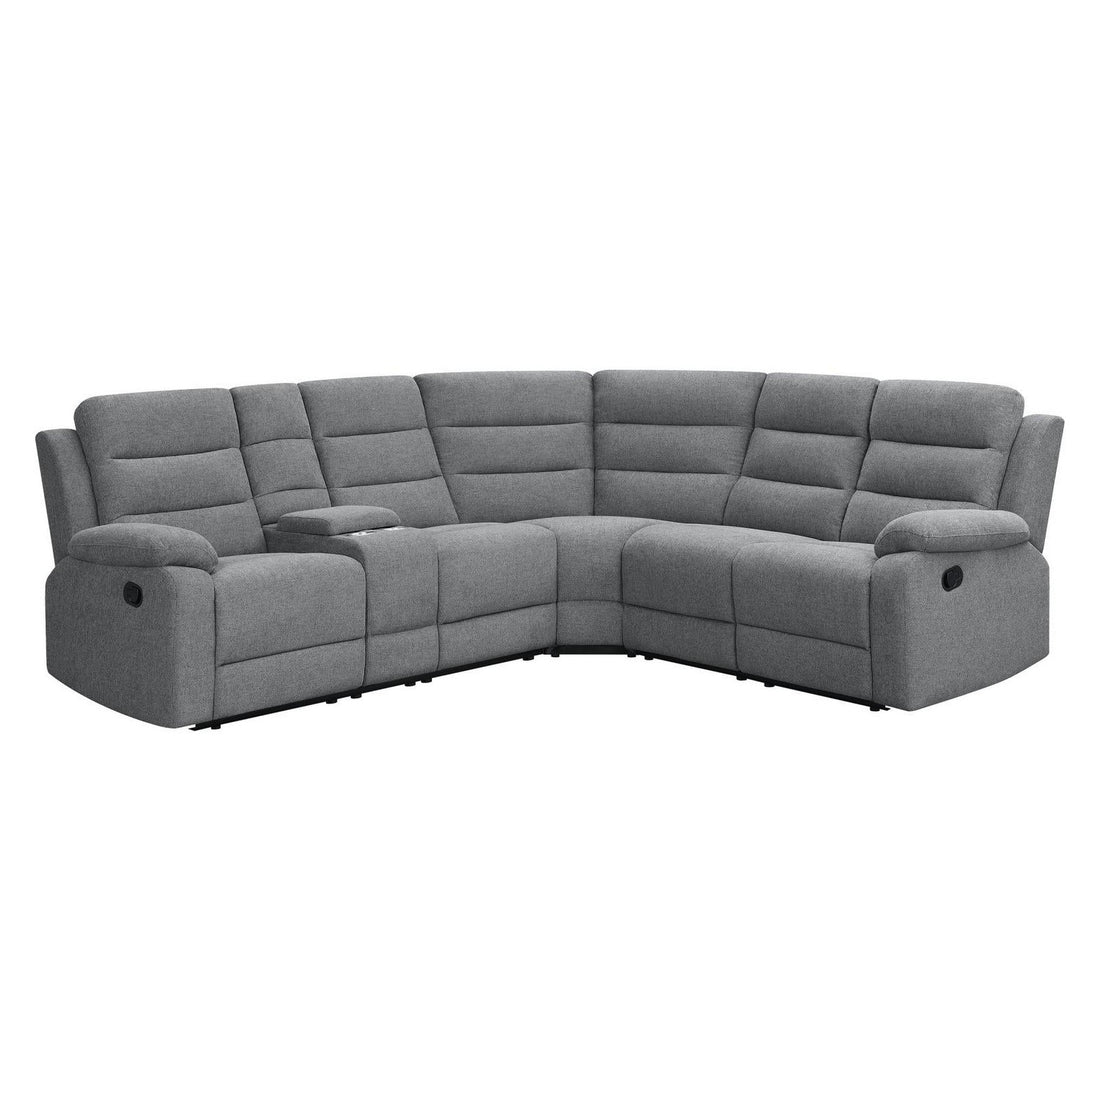 David 3-piece Upholstered Motion Sectional with Pillow Arms Smoke 609620